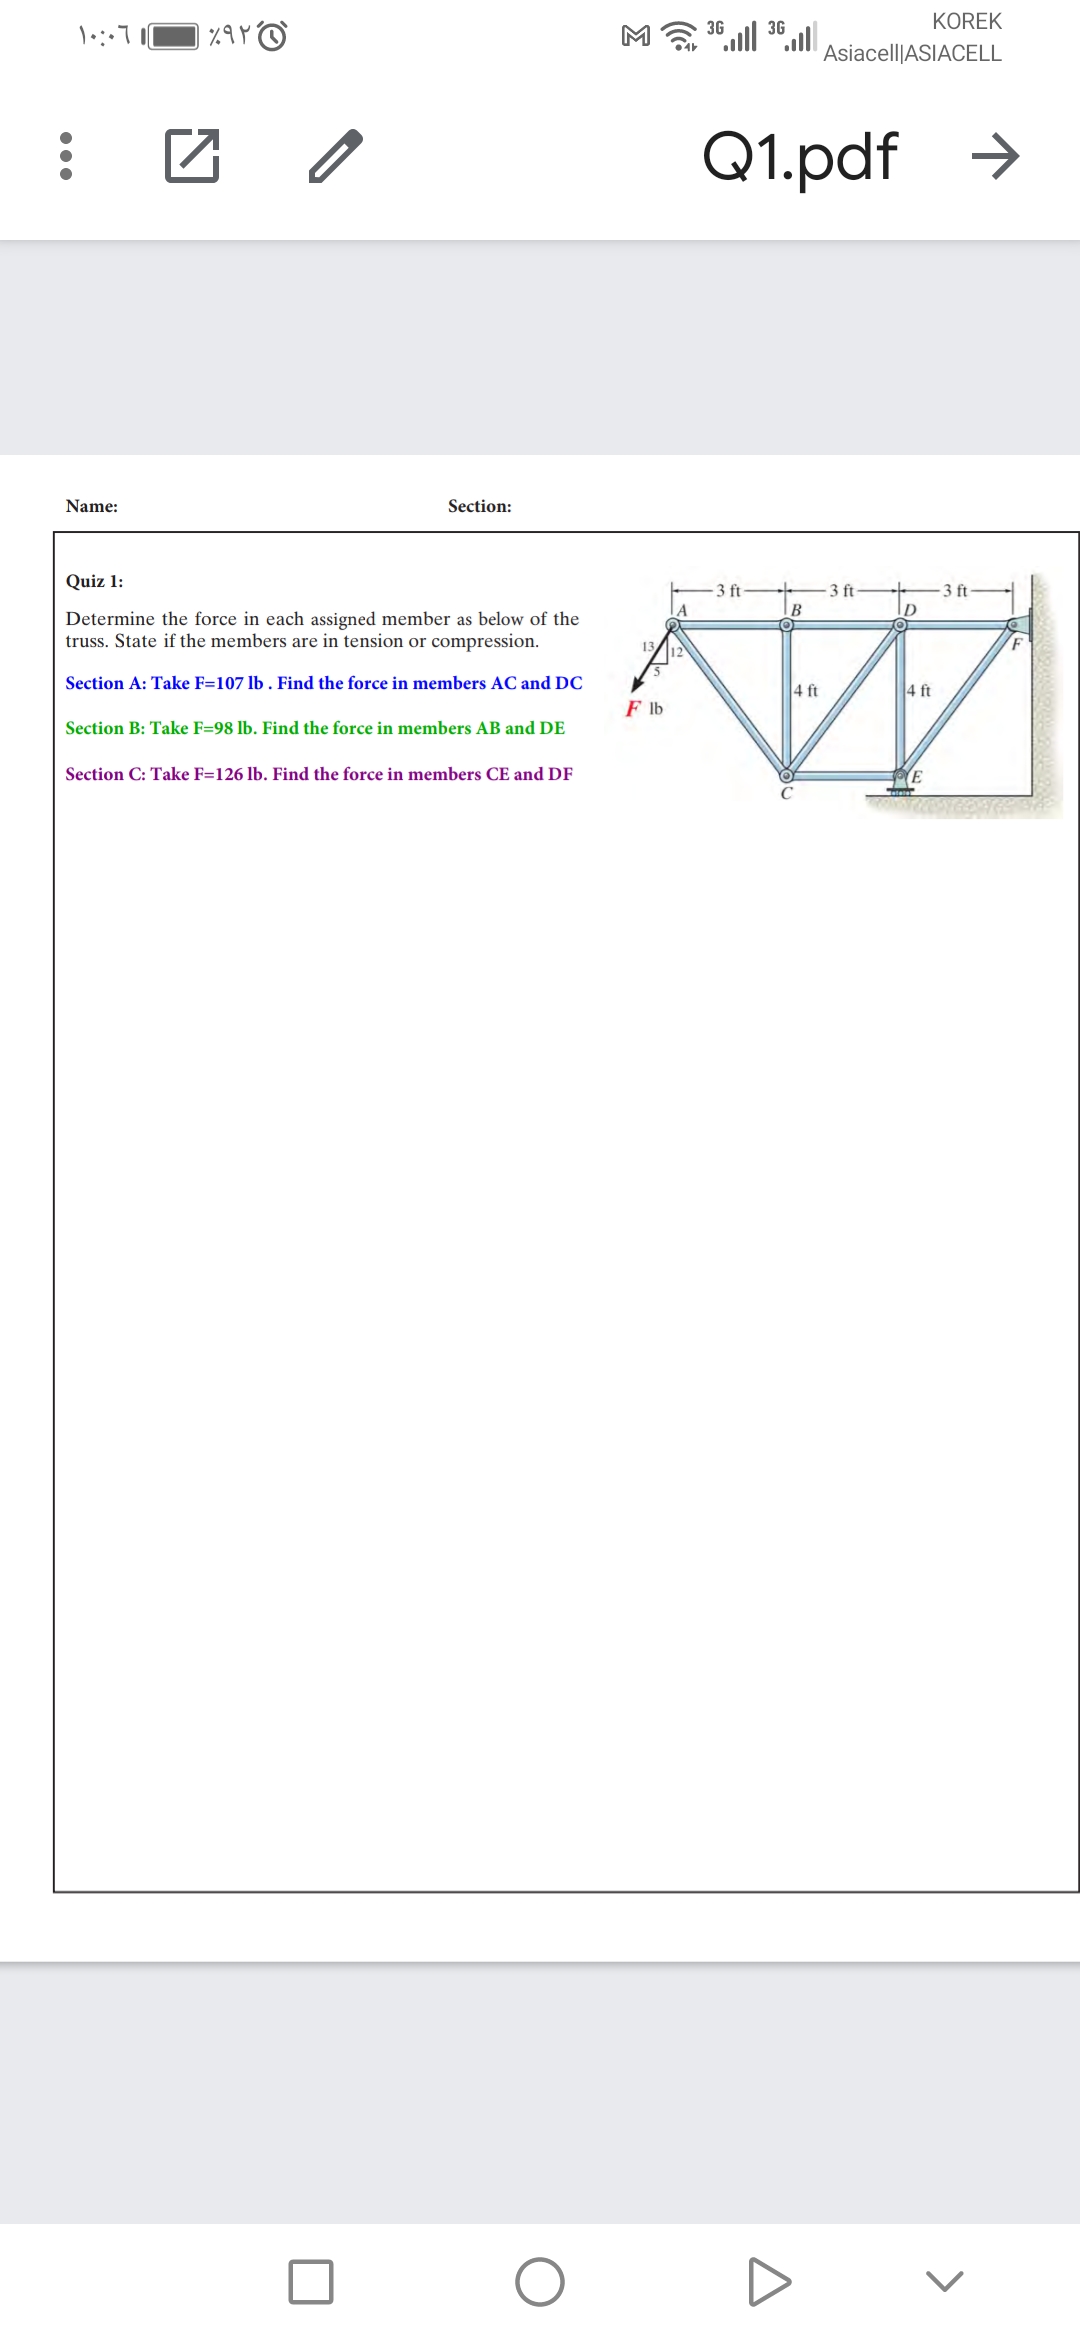 KOREK
3G
3G
Asiacell|ASIACELL
Q1.pdf →
Name:
Section:
Quiz 1:
3 ft
3 ft
3 ft-
D
Determine the force in each assigned member as below of the
truss. State if the members are in tension or compression.
Section A: Take F=107 lb . Find the force in members AC and DC
4 ft
4 ft
F lb
Section B: Take F=98 lb. Find the force in members AB and DE
Section C: Take F=126 lb. Find the force in members CE and DF
